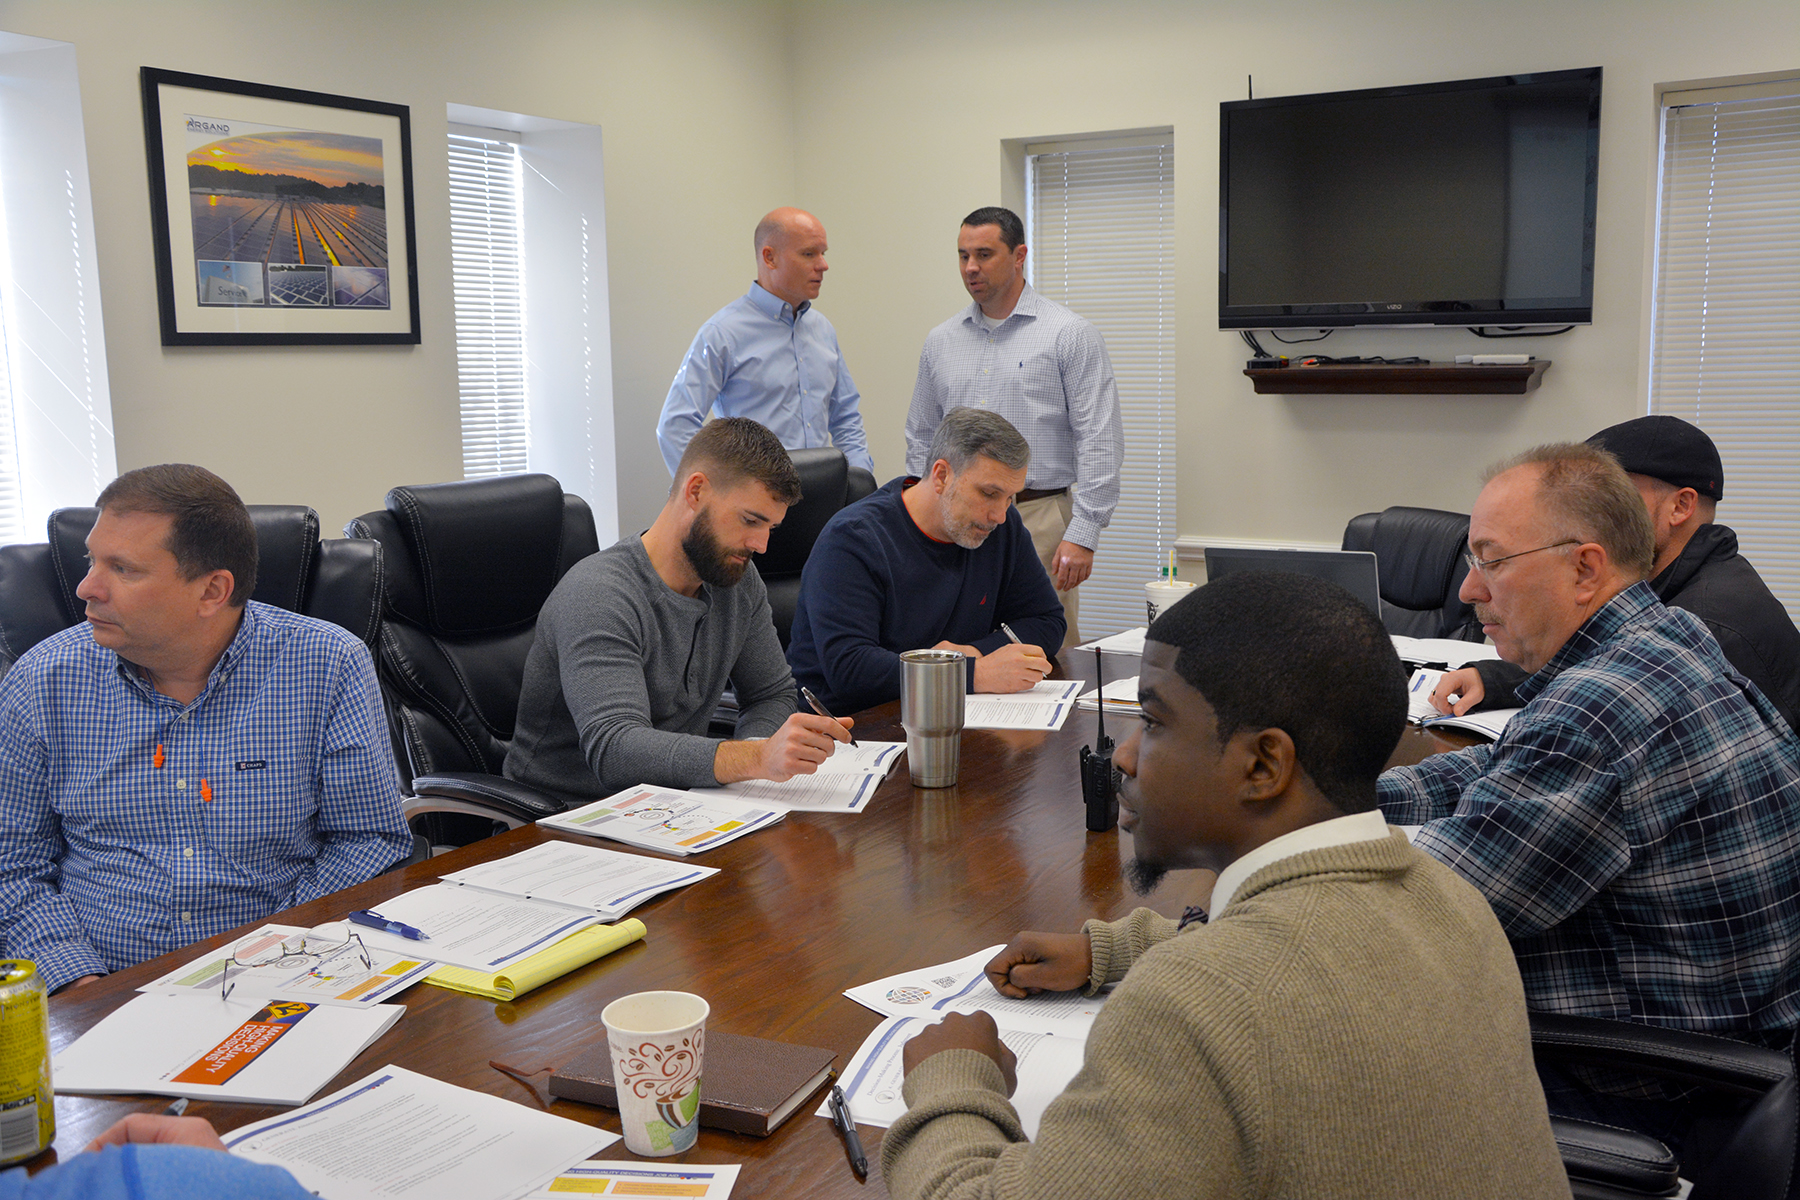 Pictured is a group of Service Thread employees in a training class offered in partnership with Richmond Community College. Standing in back are Service Thread Chief Operating Officer Jay Todd, left, and Vice President of Workforce & Economic Development for RichmondCC Robbie Taylor.